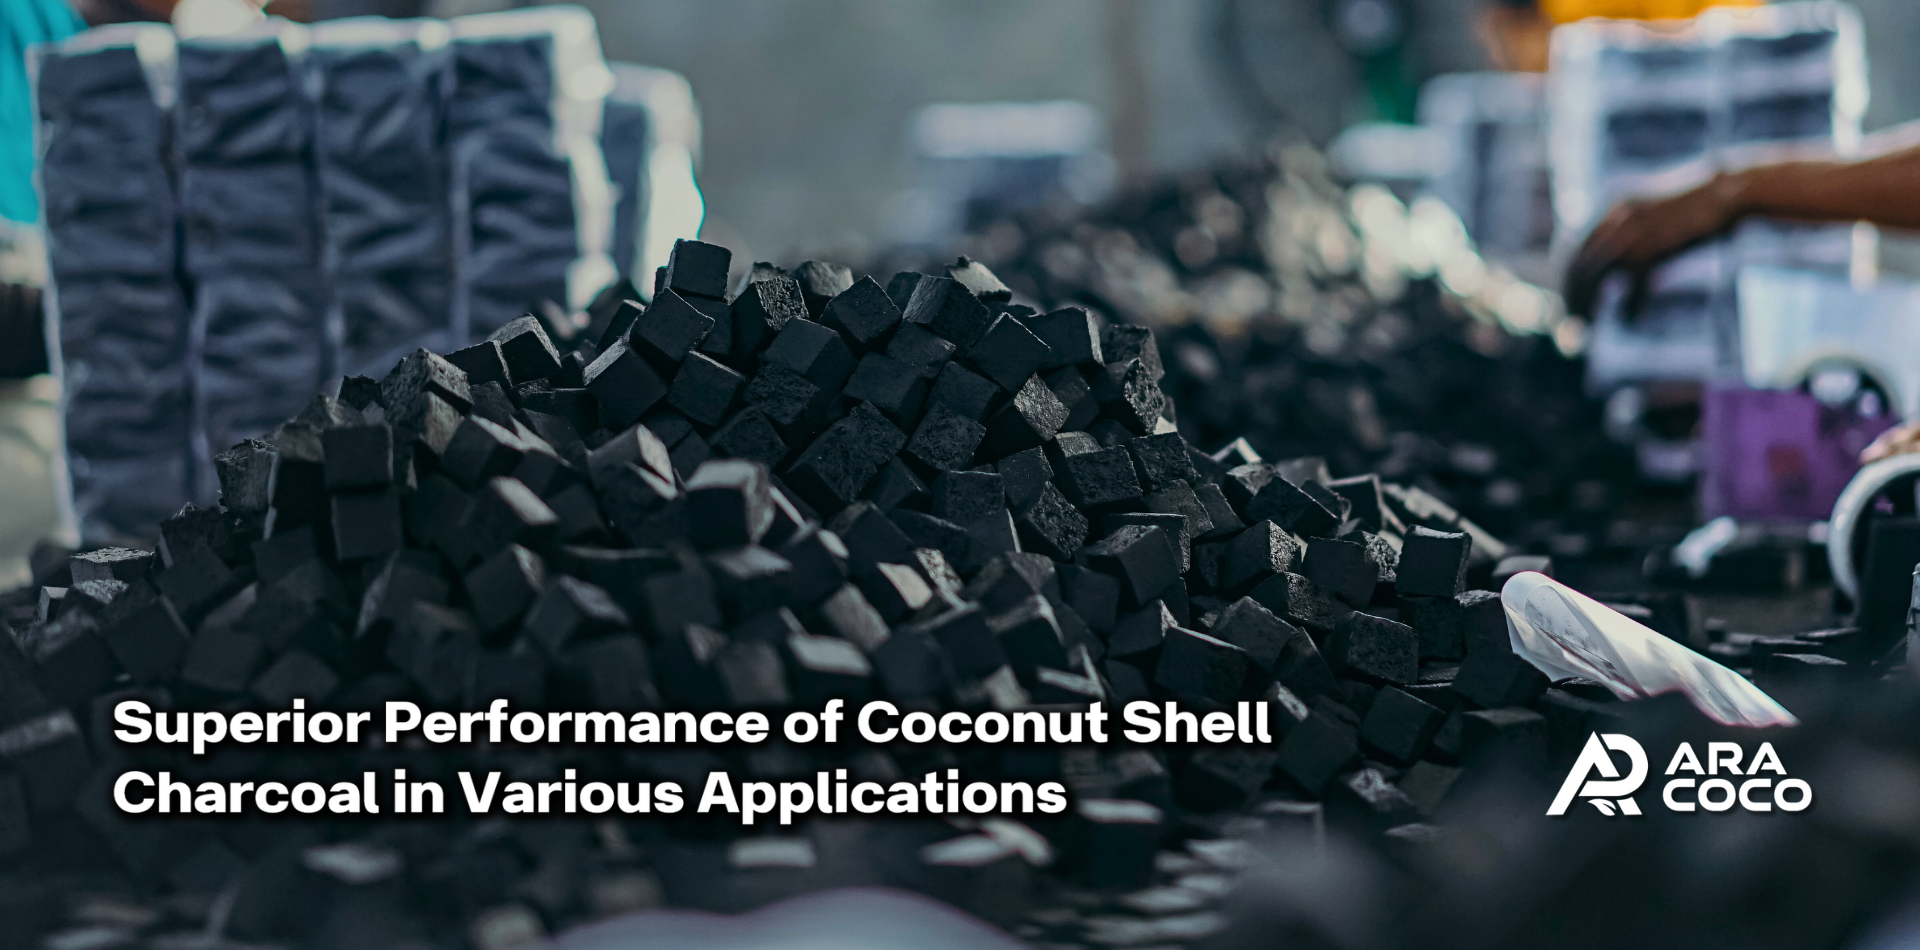 Superior Performance of Coconut Shell Charcoal in Various Applications